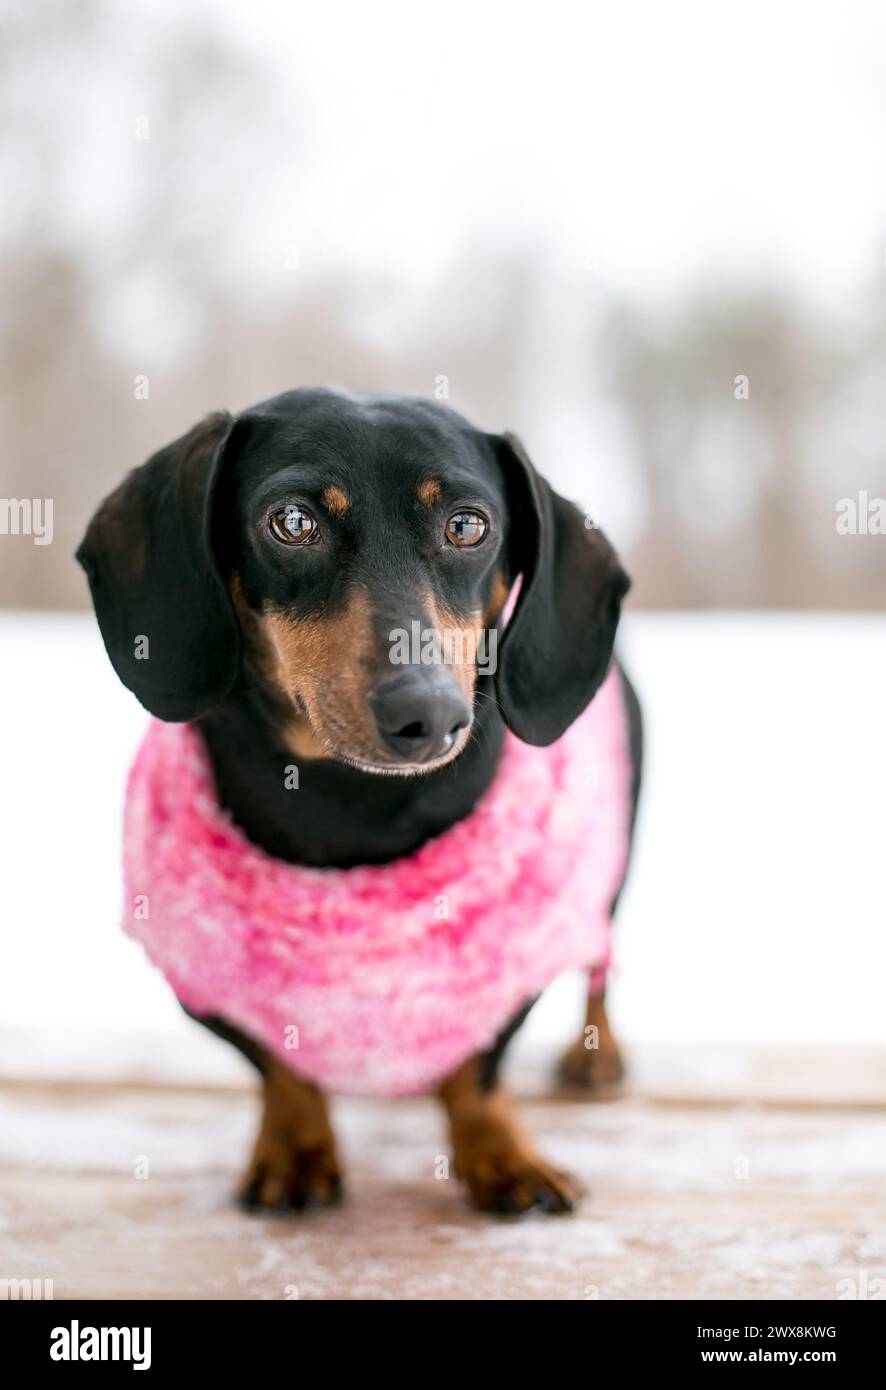 A purebred Dachshund dog wearing a sweater outdoors in the snow Stock Photo